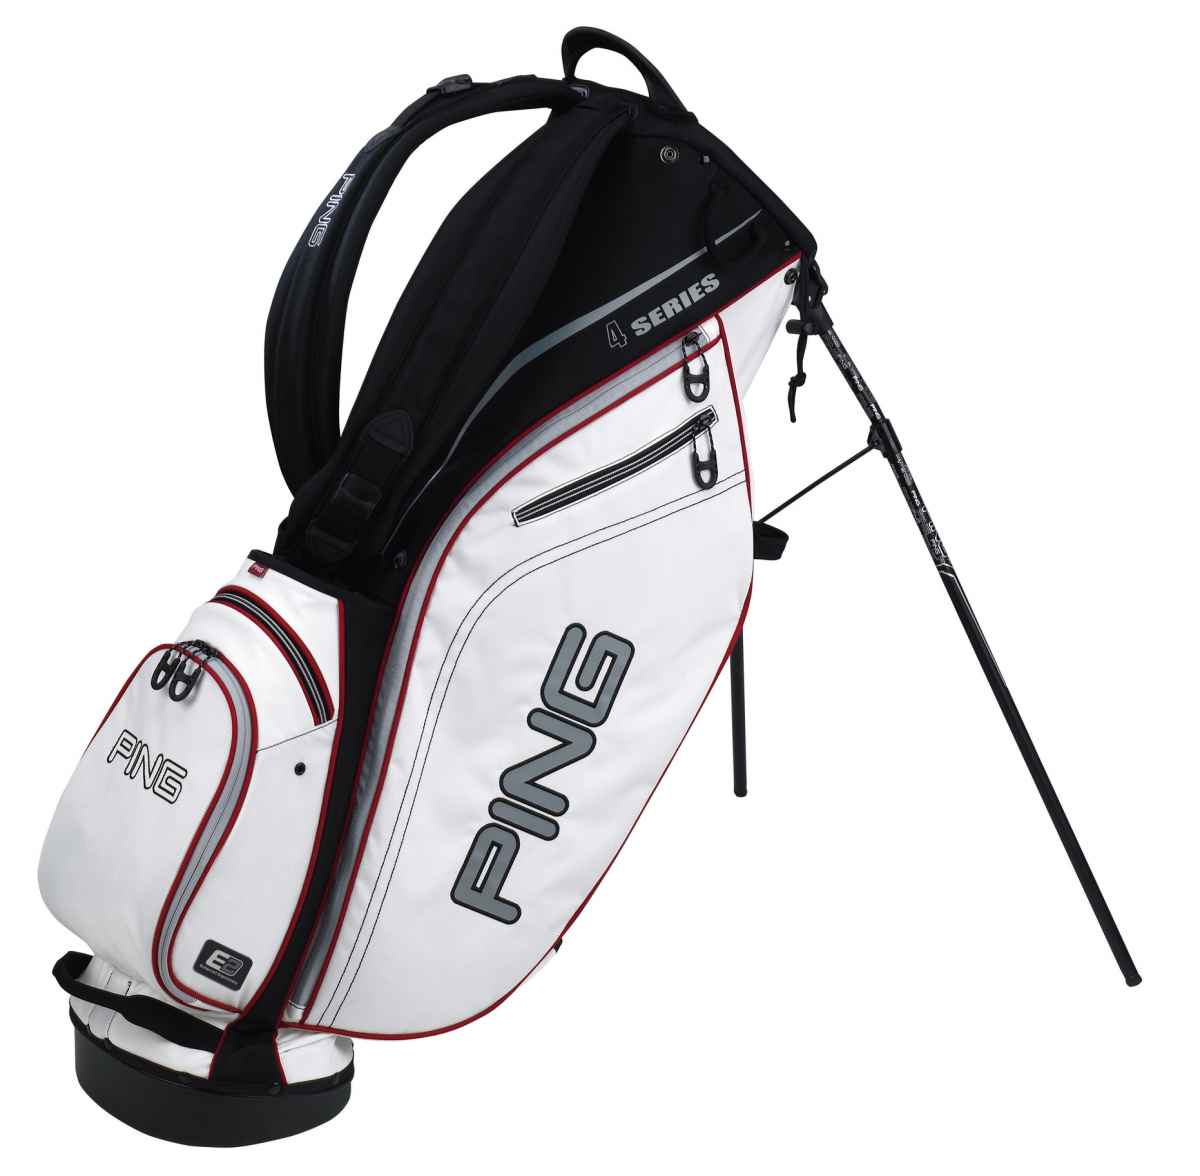 Ping Golf Bags Online in India  Sportdealsin